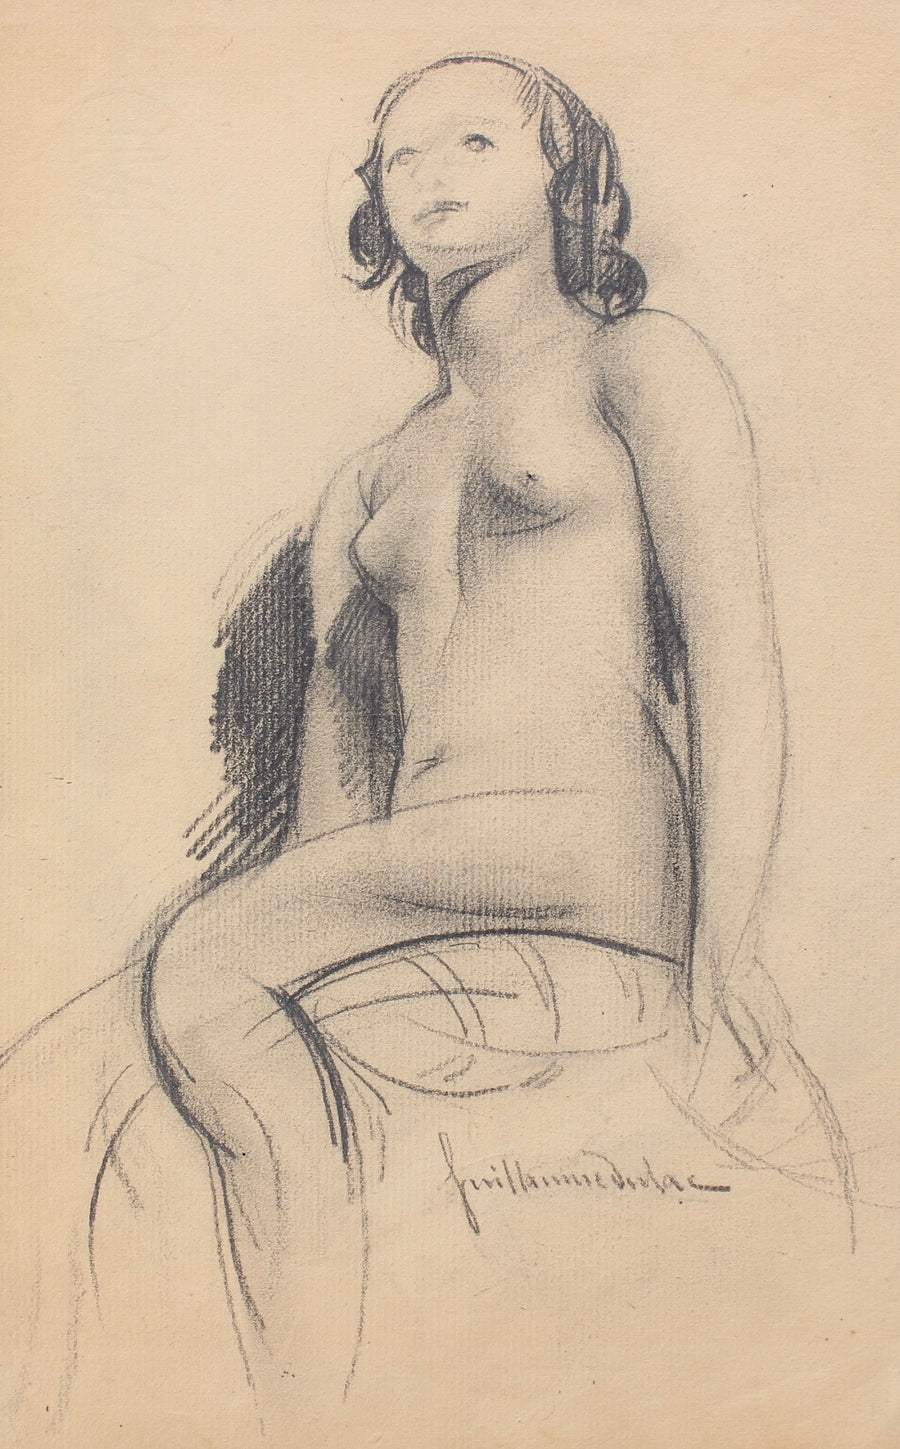 'The Seated Nude' by Guillaume Dulac (circa 1920s)